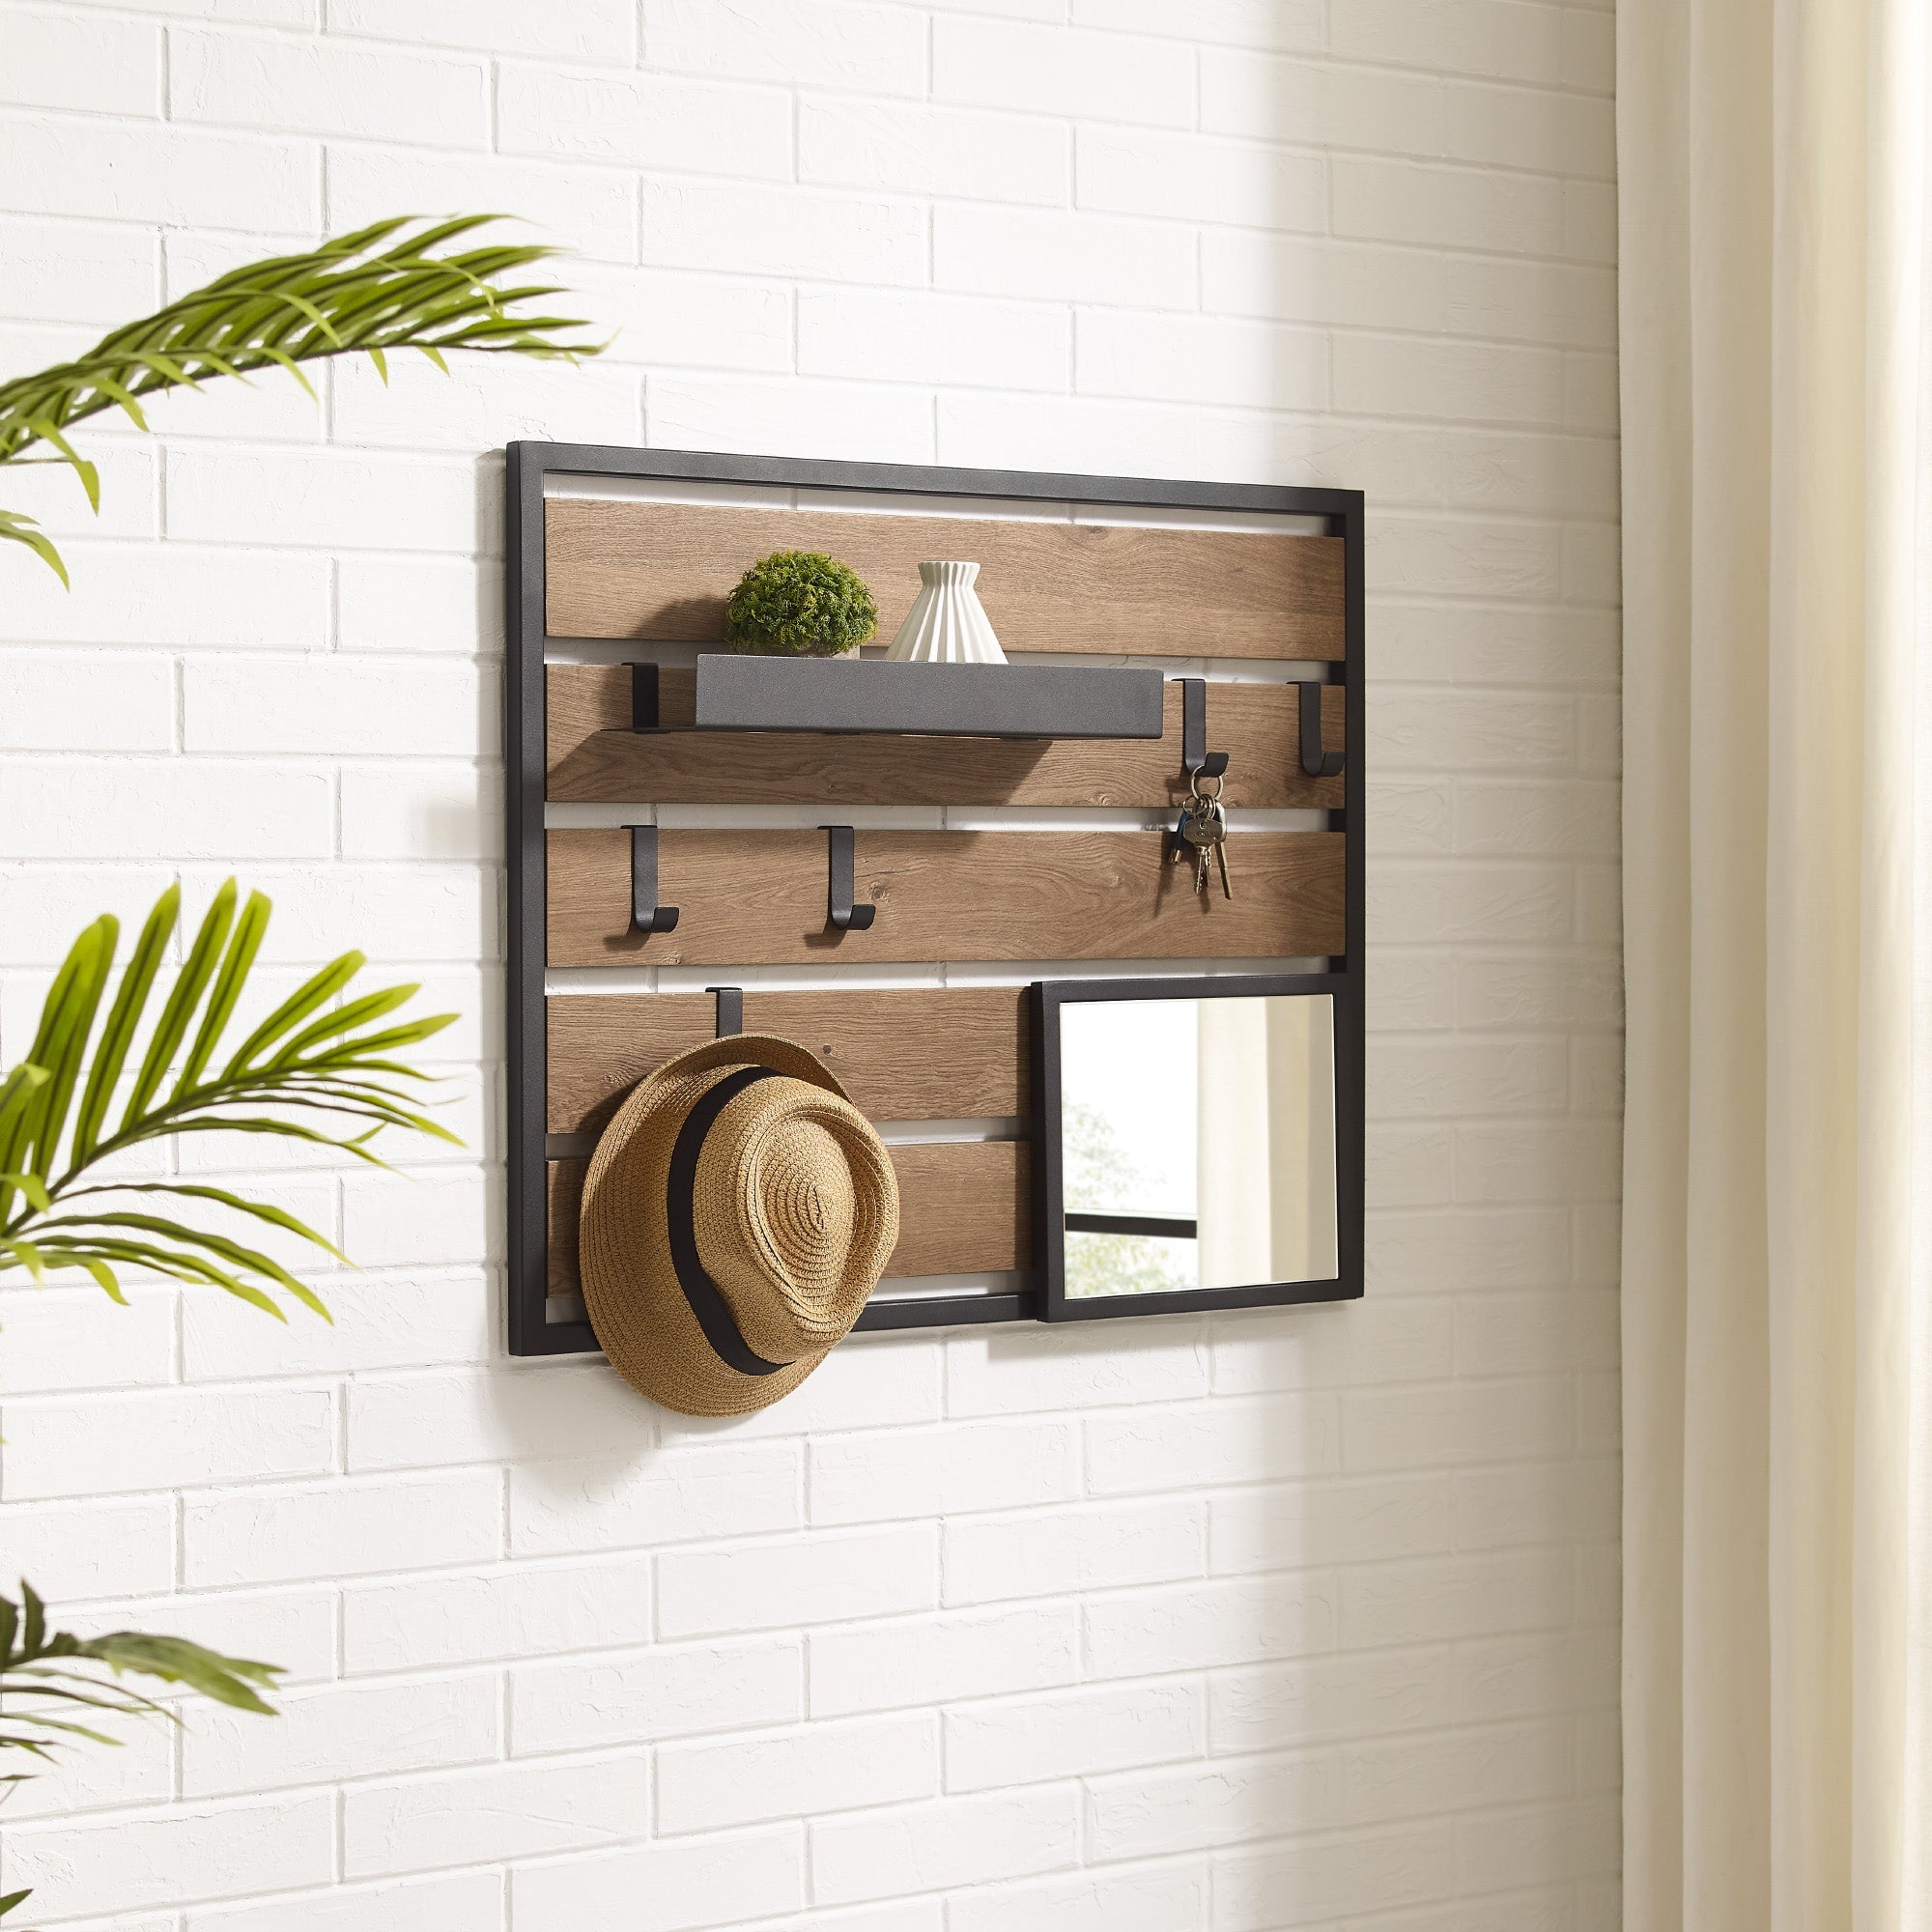 43" Slatted Wall Organizer with Mirror